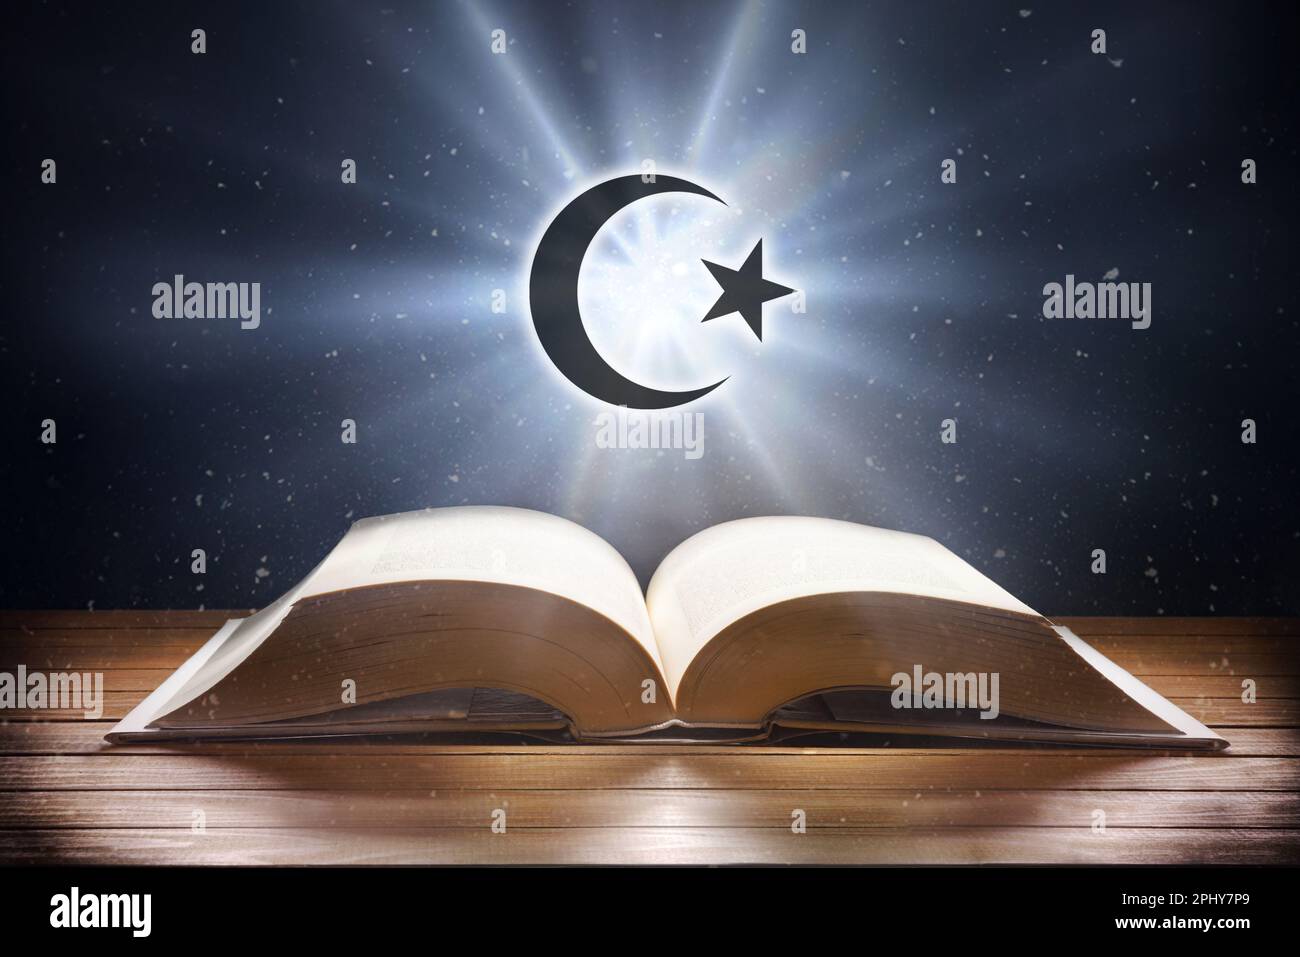 Open book on wooden table and islamic symbol with beam of light with dark background. Front view. Stock Photo